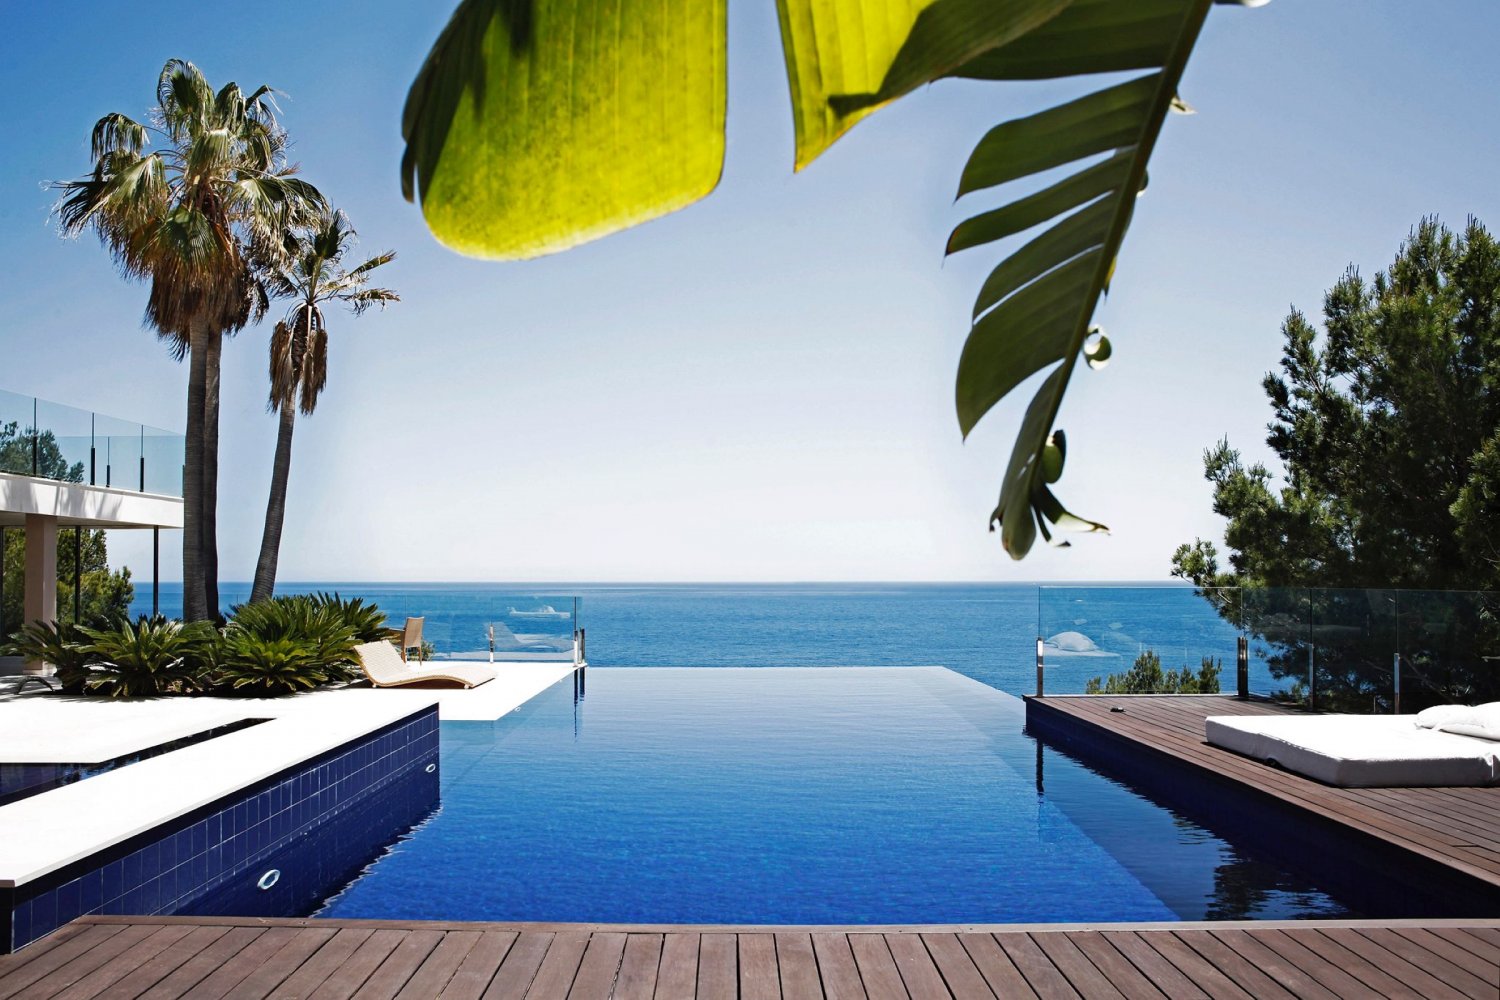 ASPECTS TO CONSIDER WHEN EVALUATING IBIZA VILLAS FOR SALE